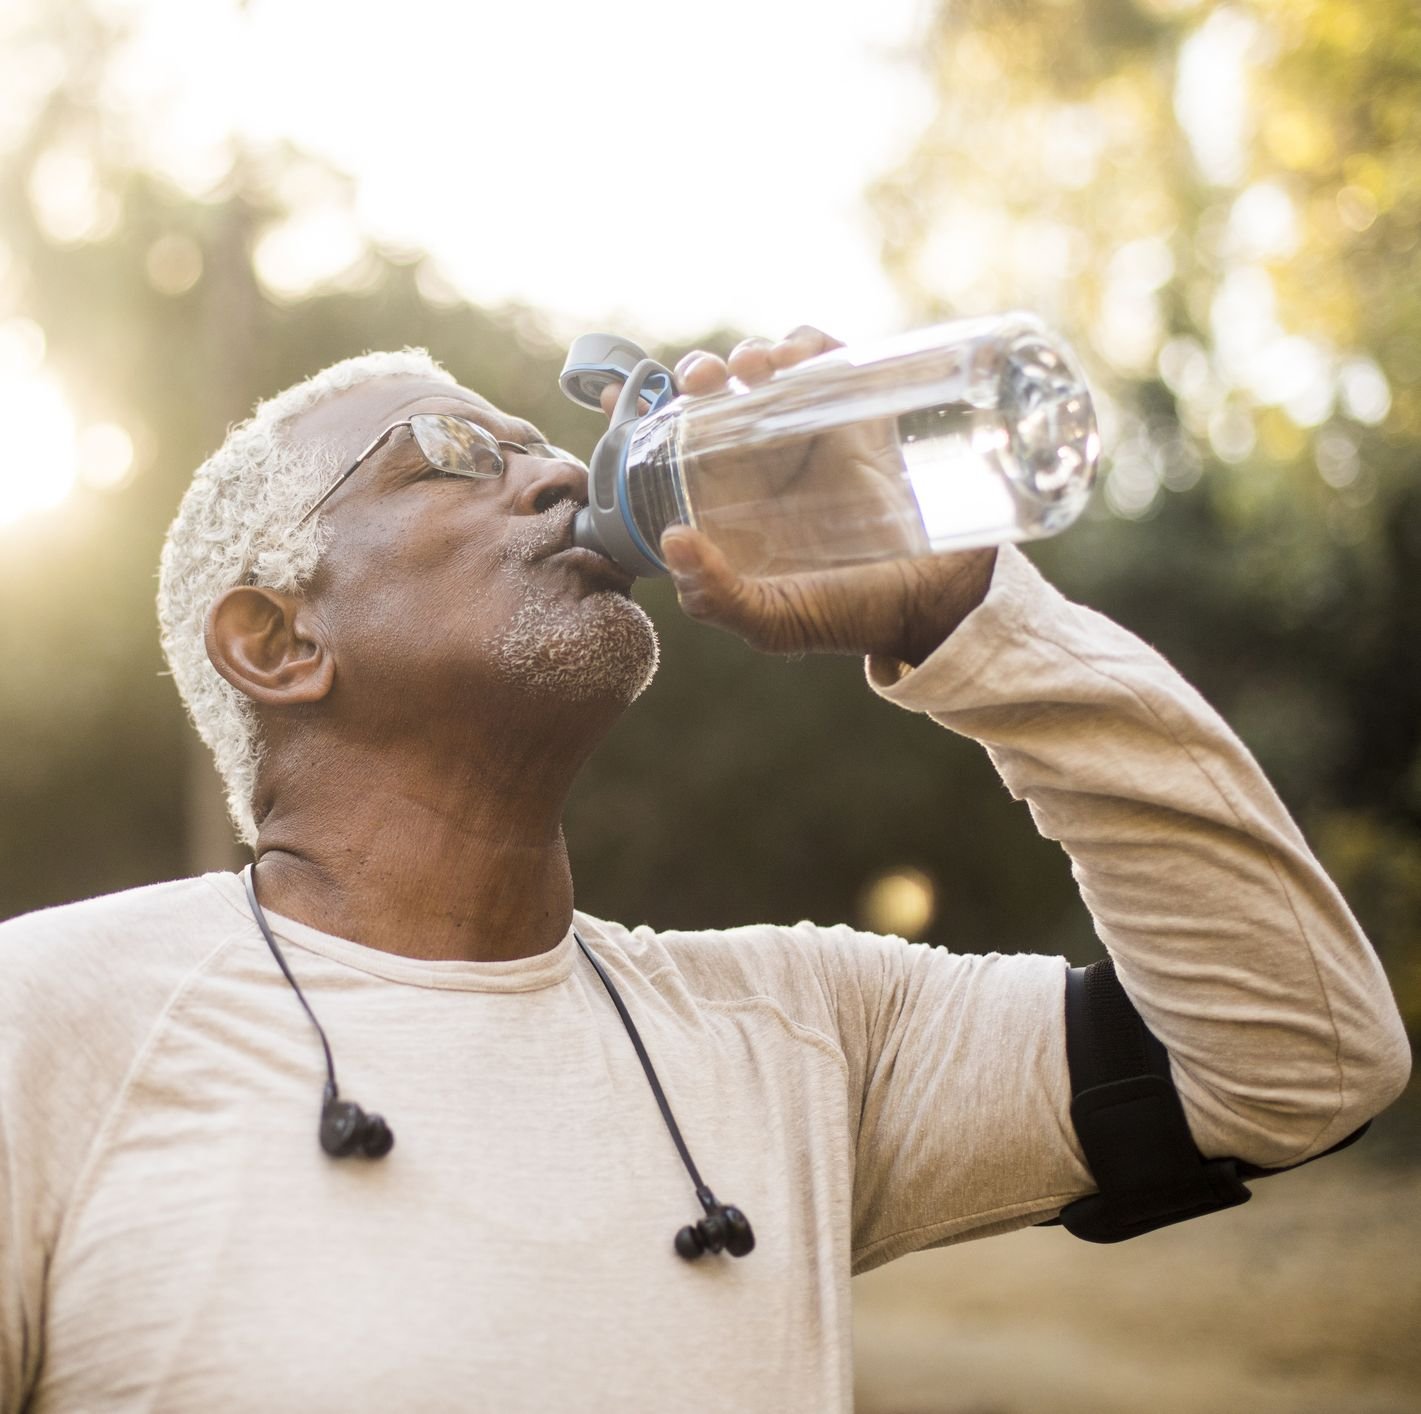 Exactly How Much Water You Should Drink to Lose Weight